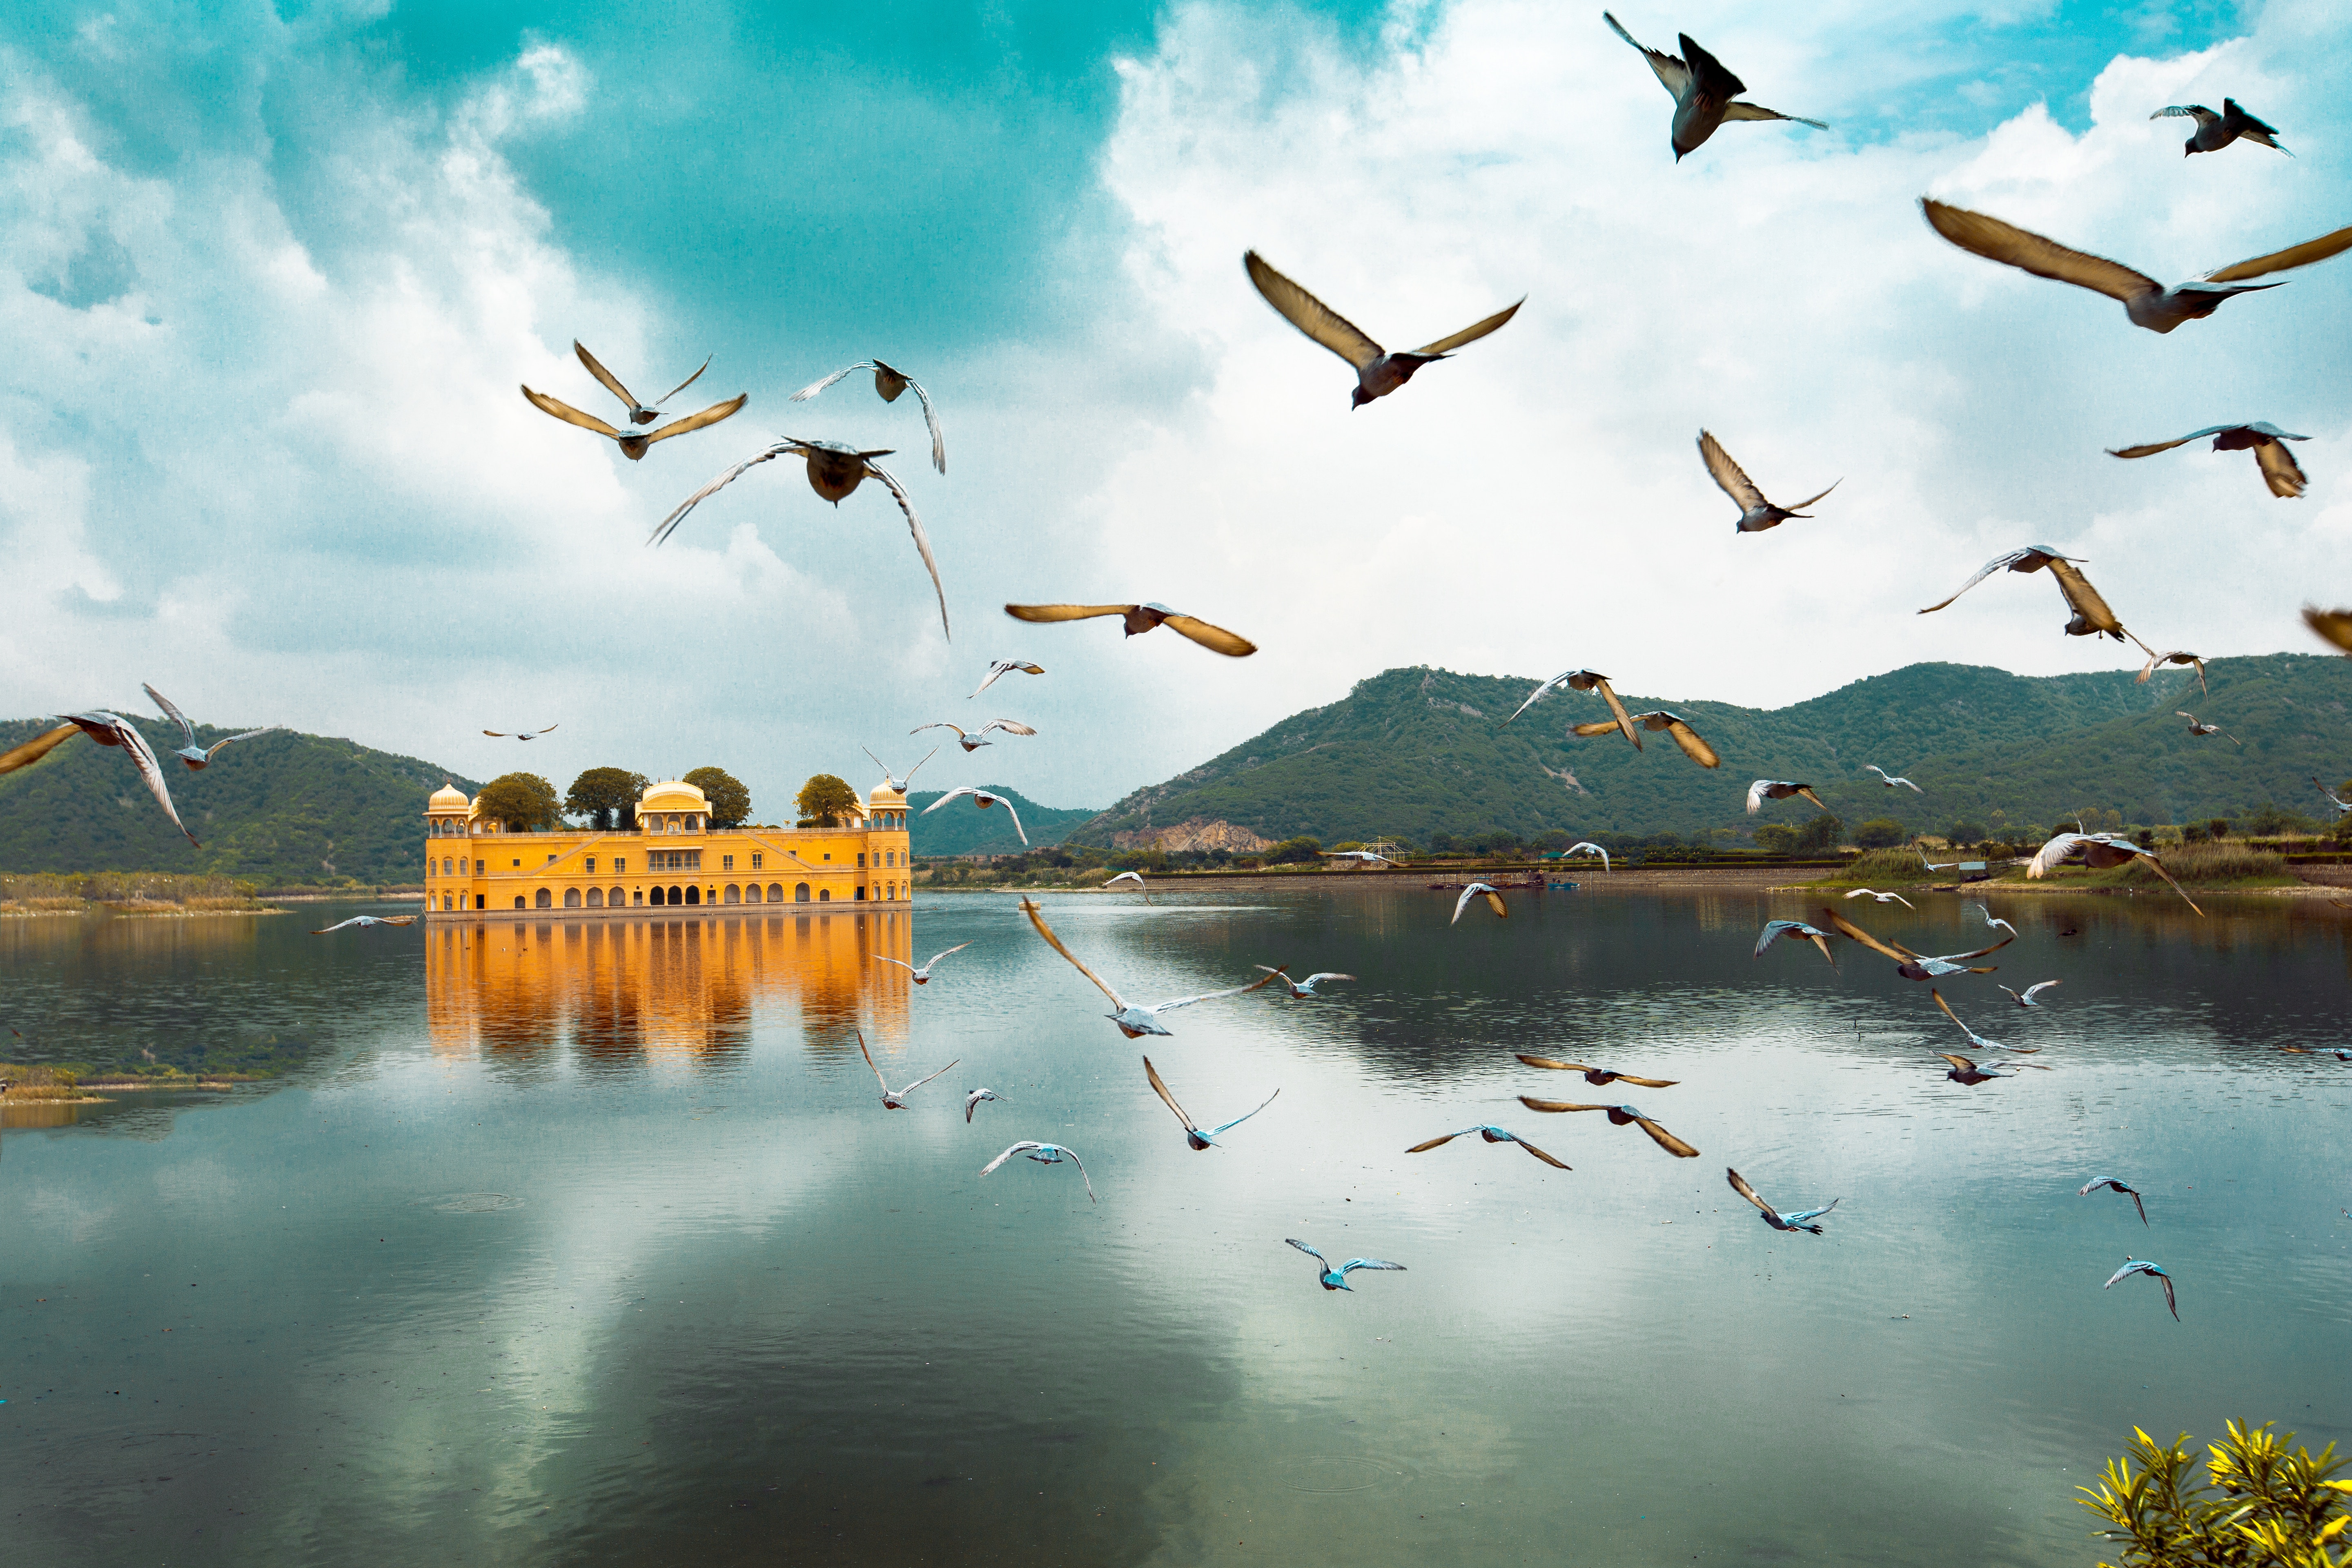 Jal Mahal is one of the old palaces of Jaipur. It is a beautiful place to visit. Jal Mahal is located in the lake. 